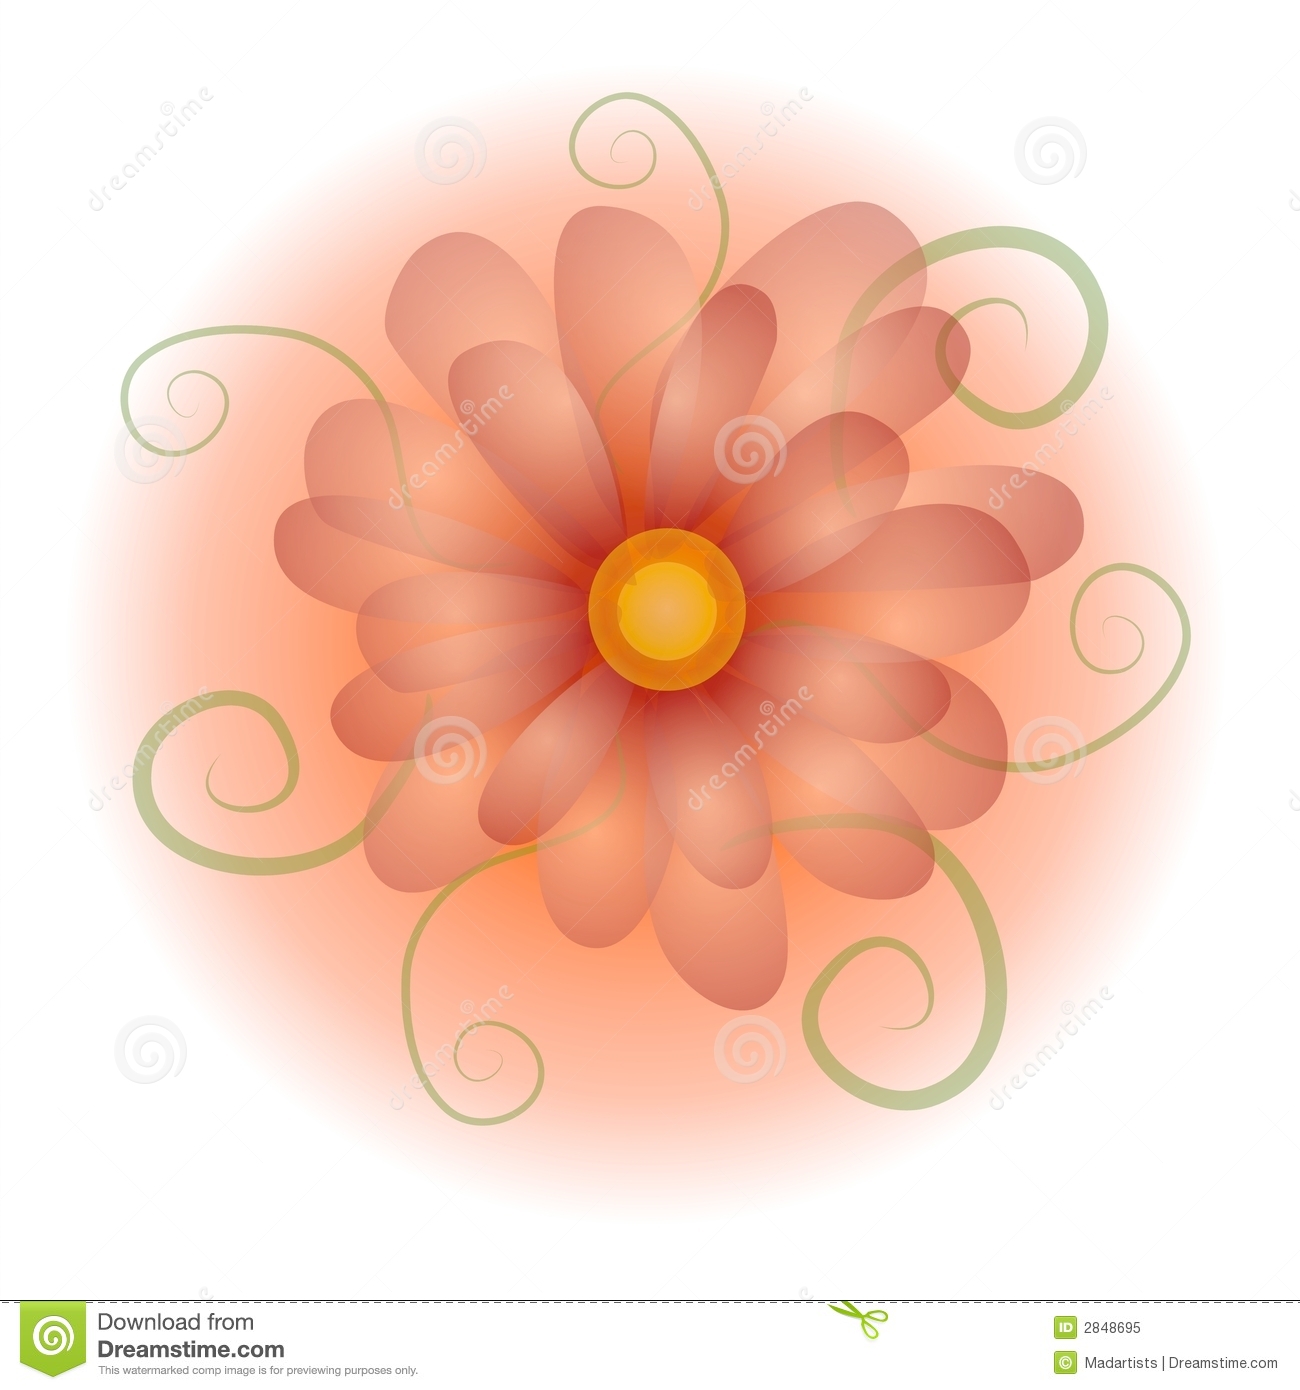 Pastel Colored Opaque Flower Design In Soft Pinks And Peach Colors